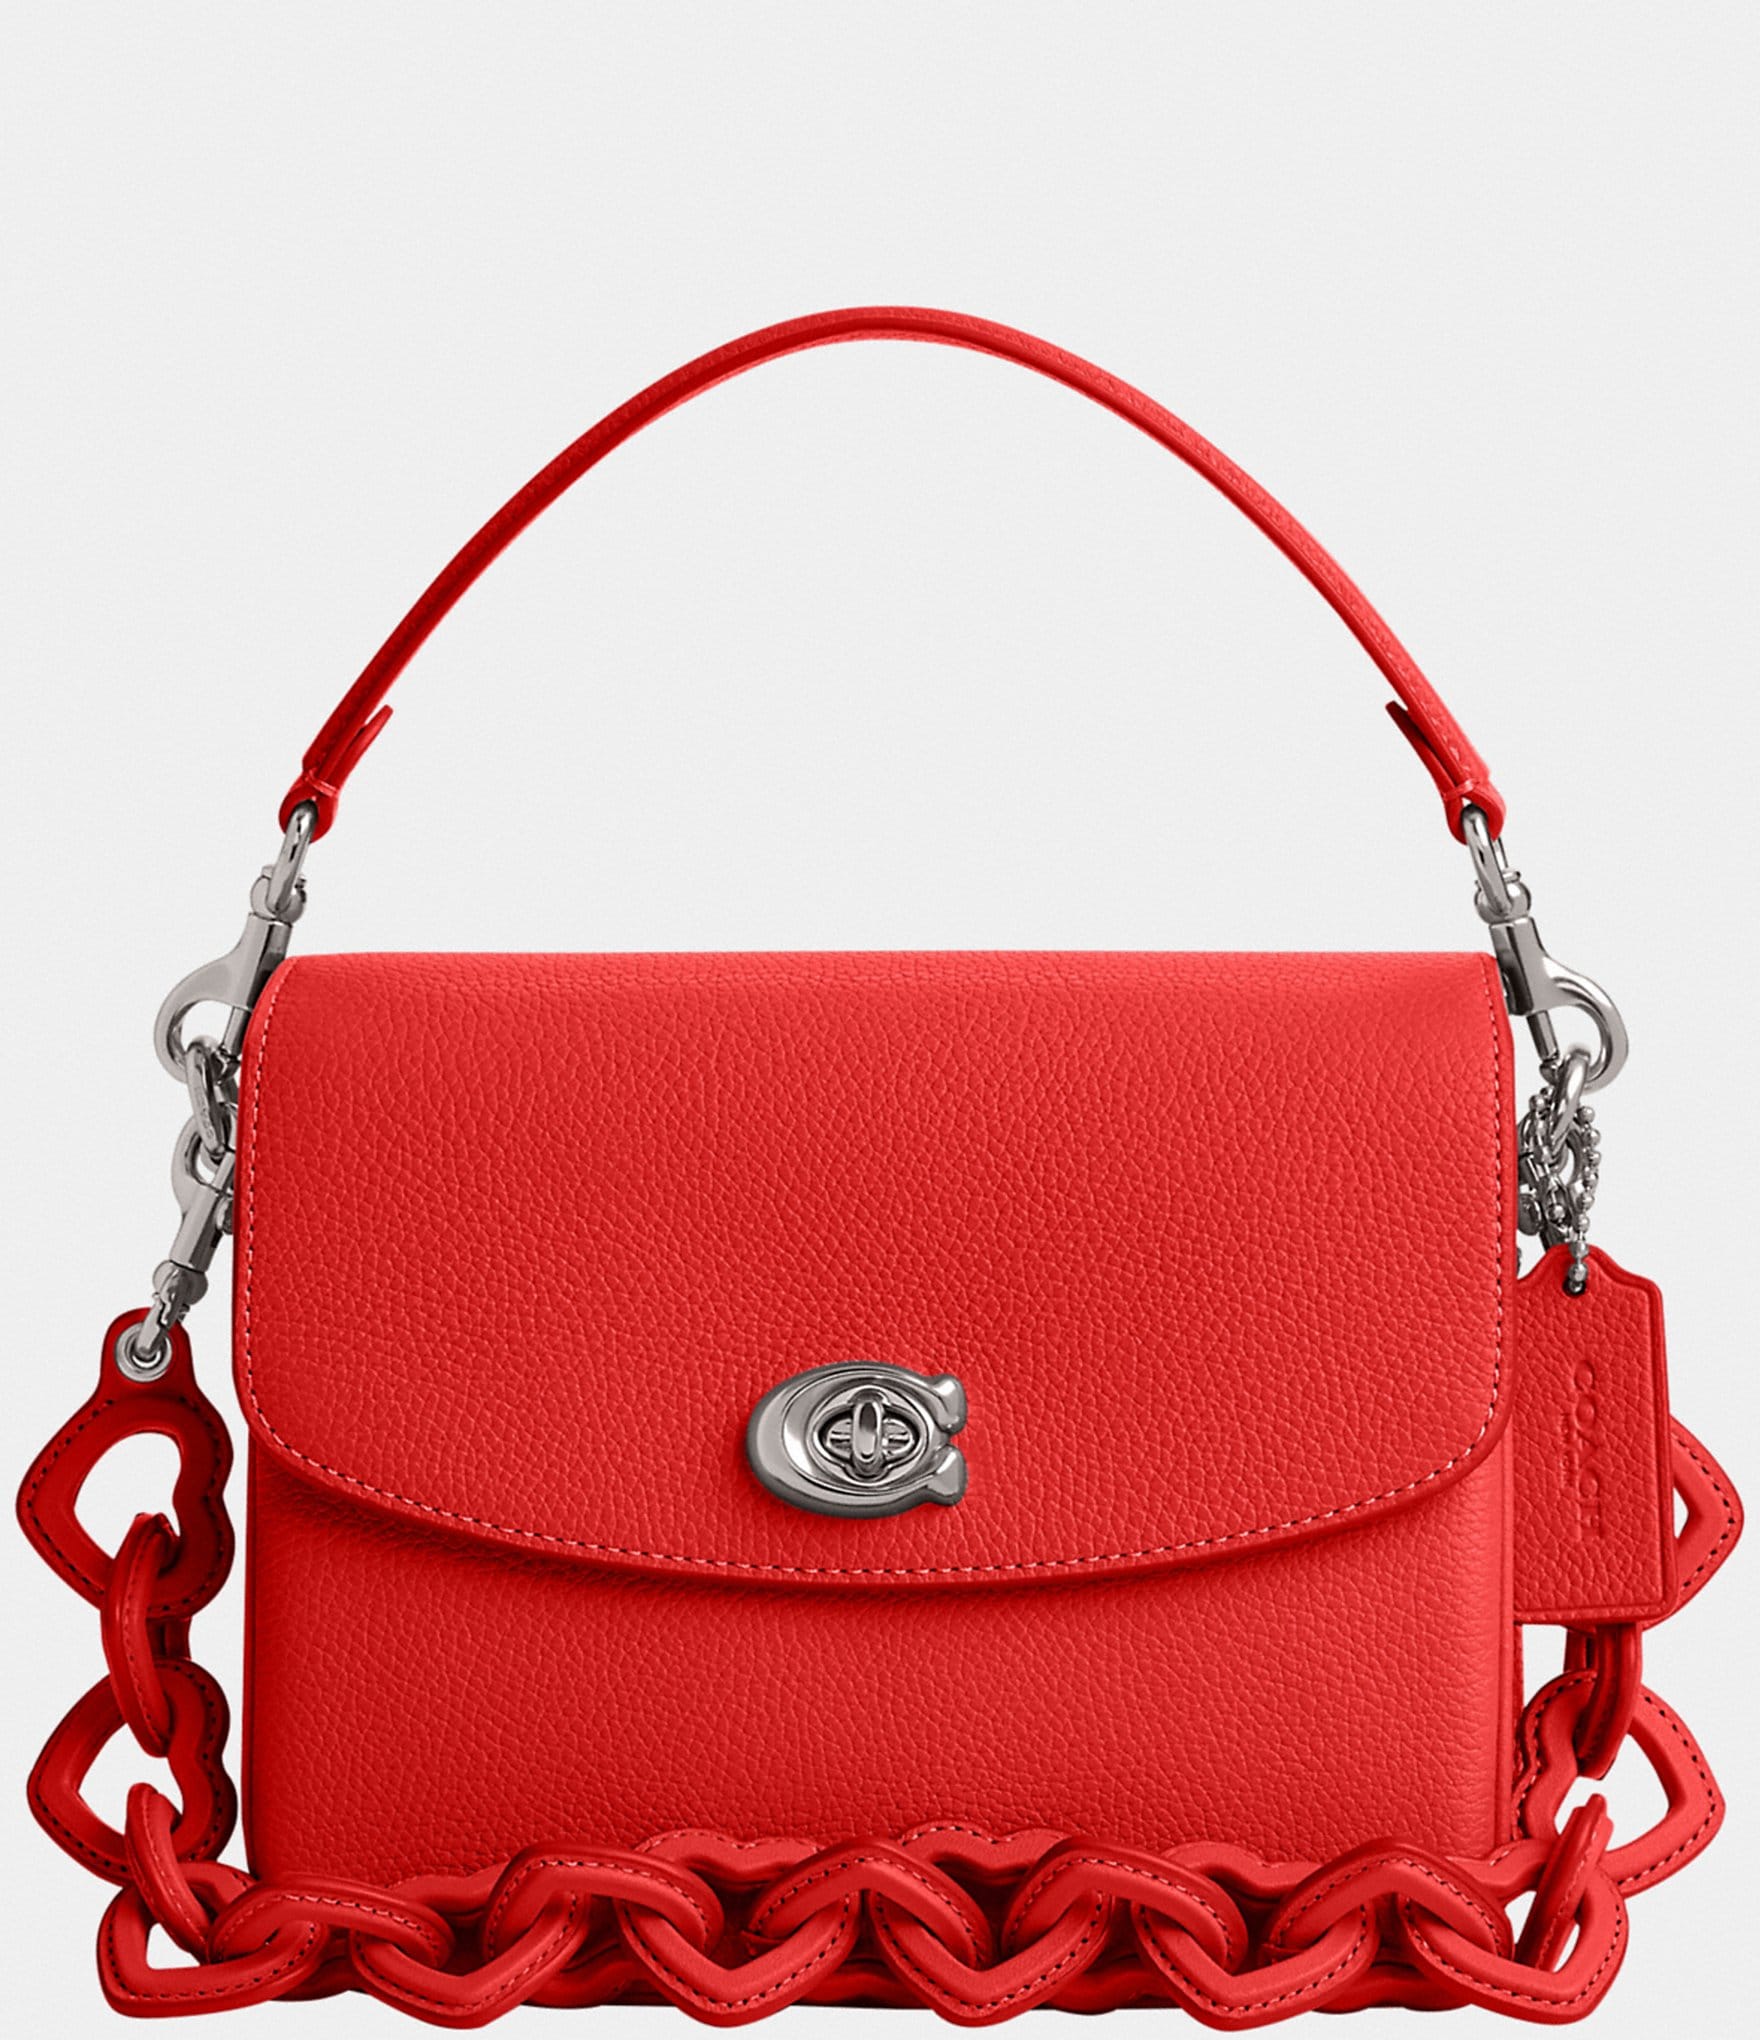 Coach New York Crossbody Purse with Red Leather Accents. We do not see a  serial number